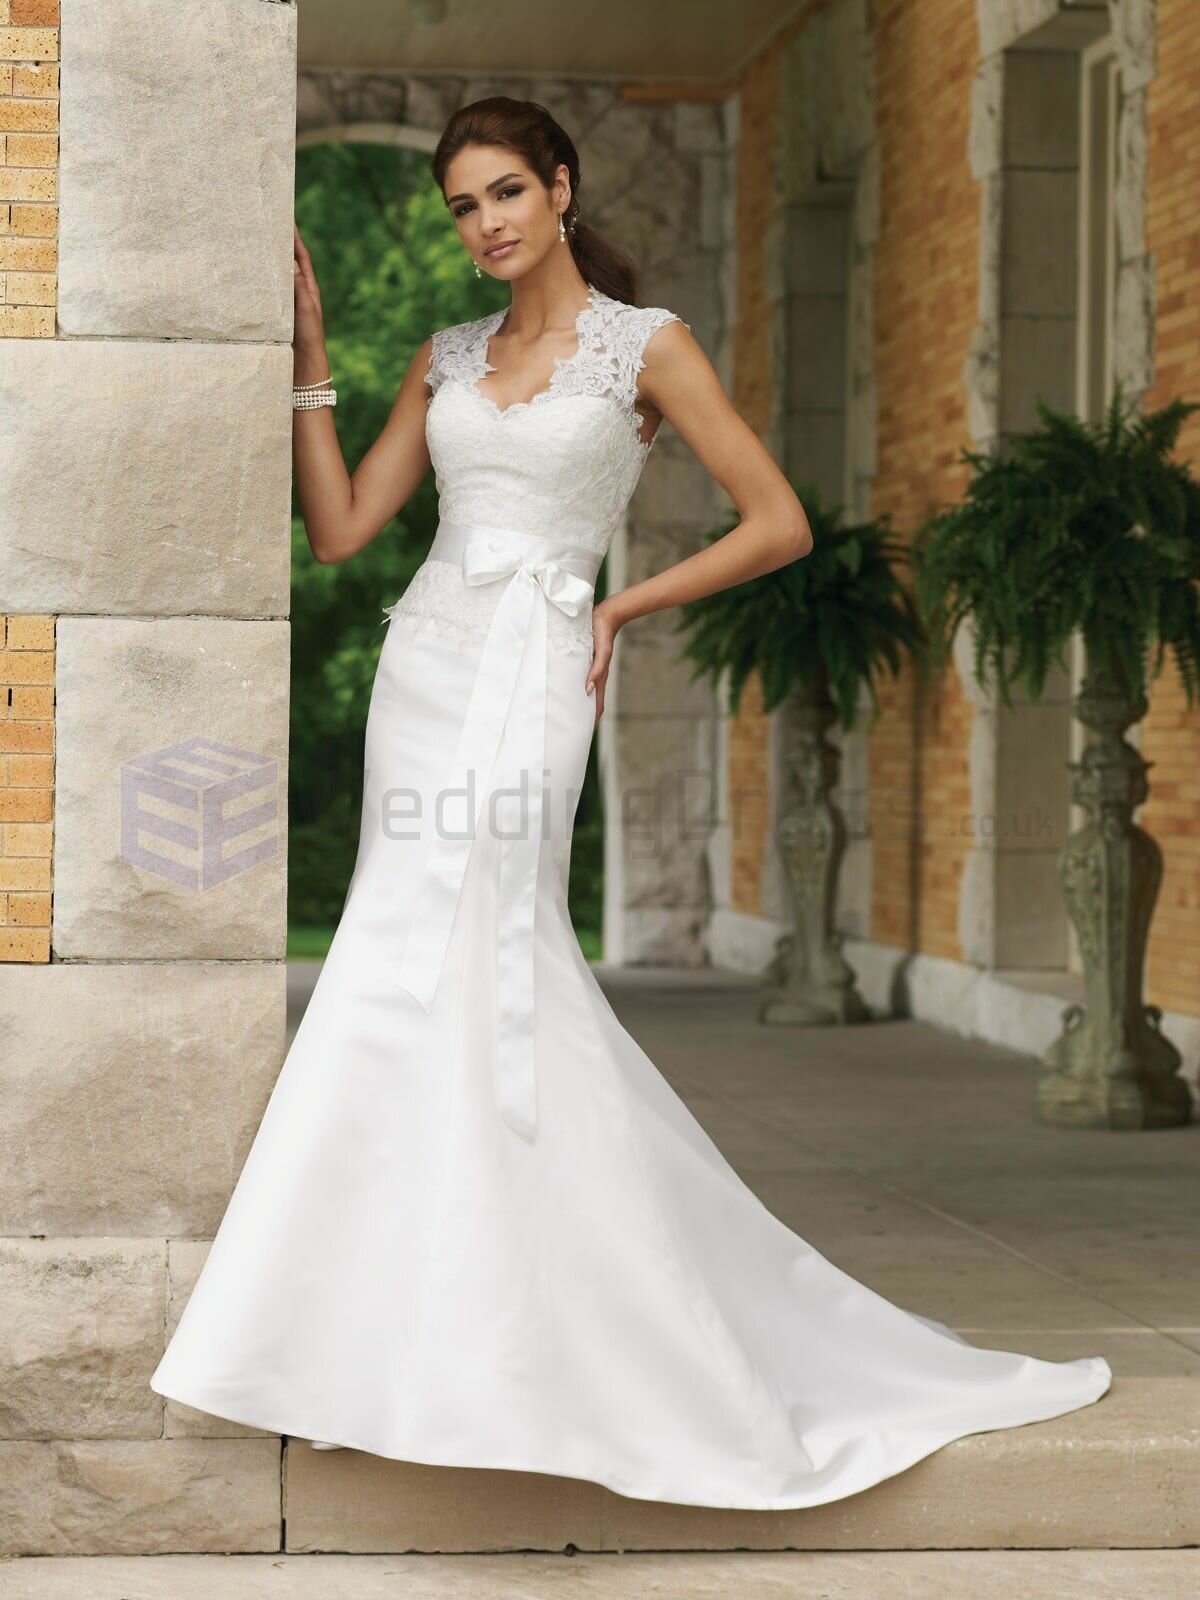 Wedding dresses with lace straps Photo - 9